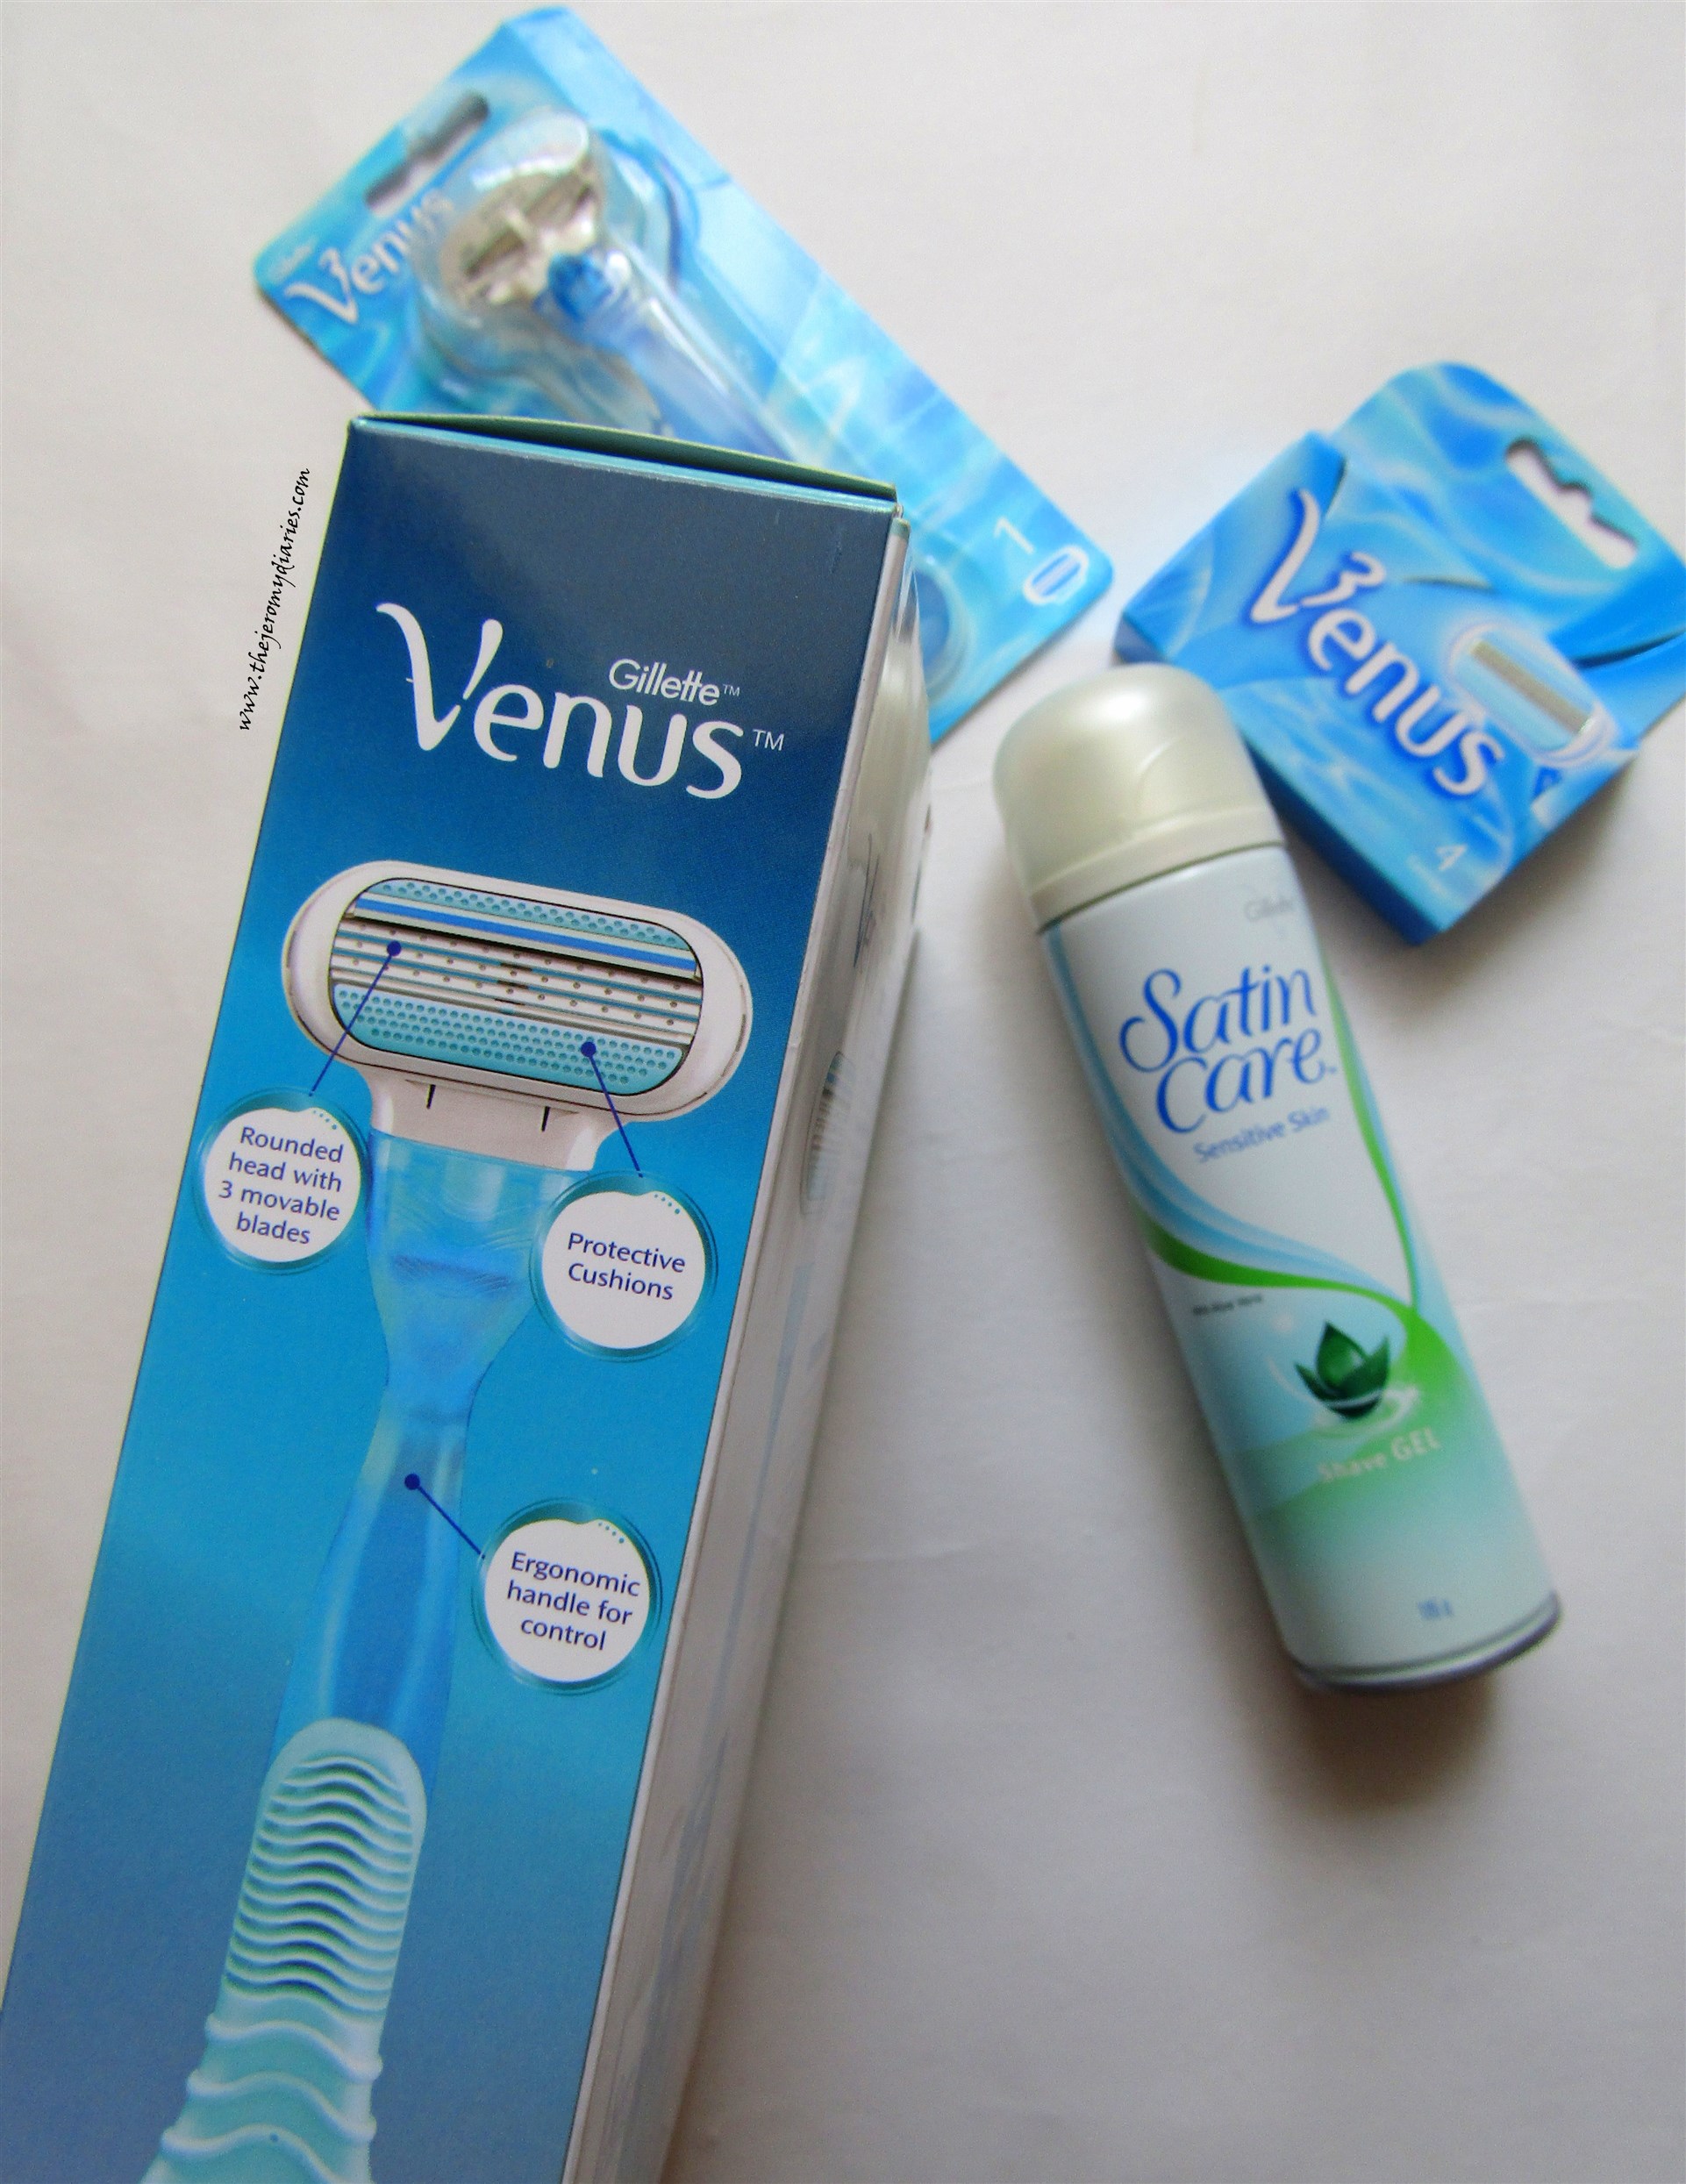 gillette venus shaving kit price and availability in india the jeromy diaries